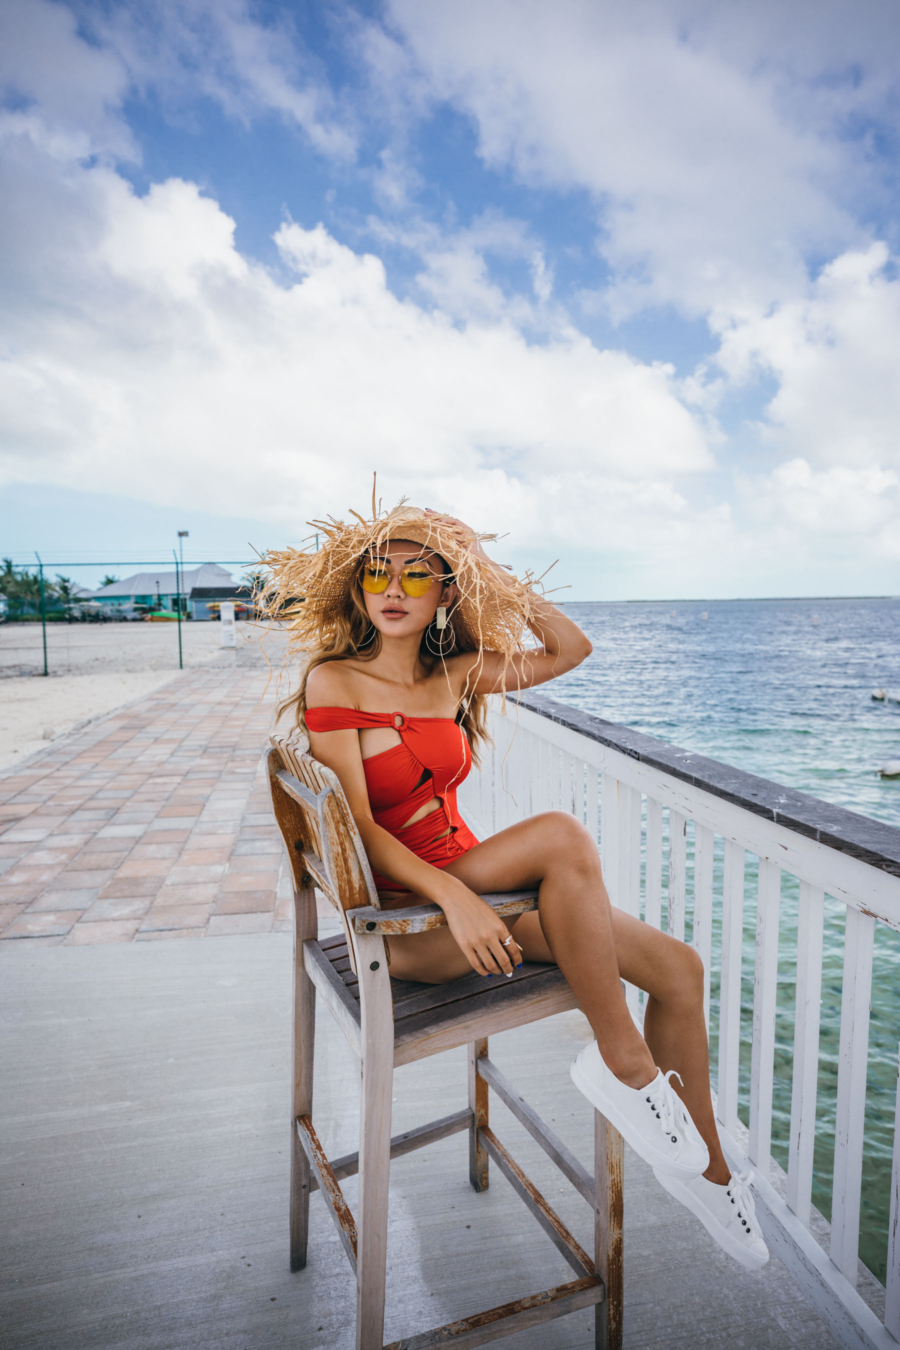 Fringe Hat and Red One Piece Swimsuit - How To Find The Perfect One Piece Swimsuit // NotJessFashion.com